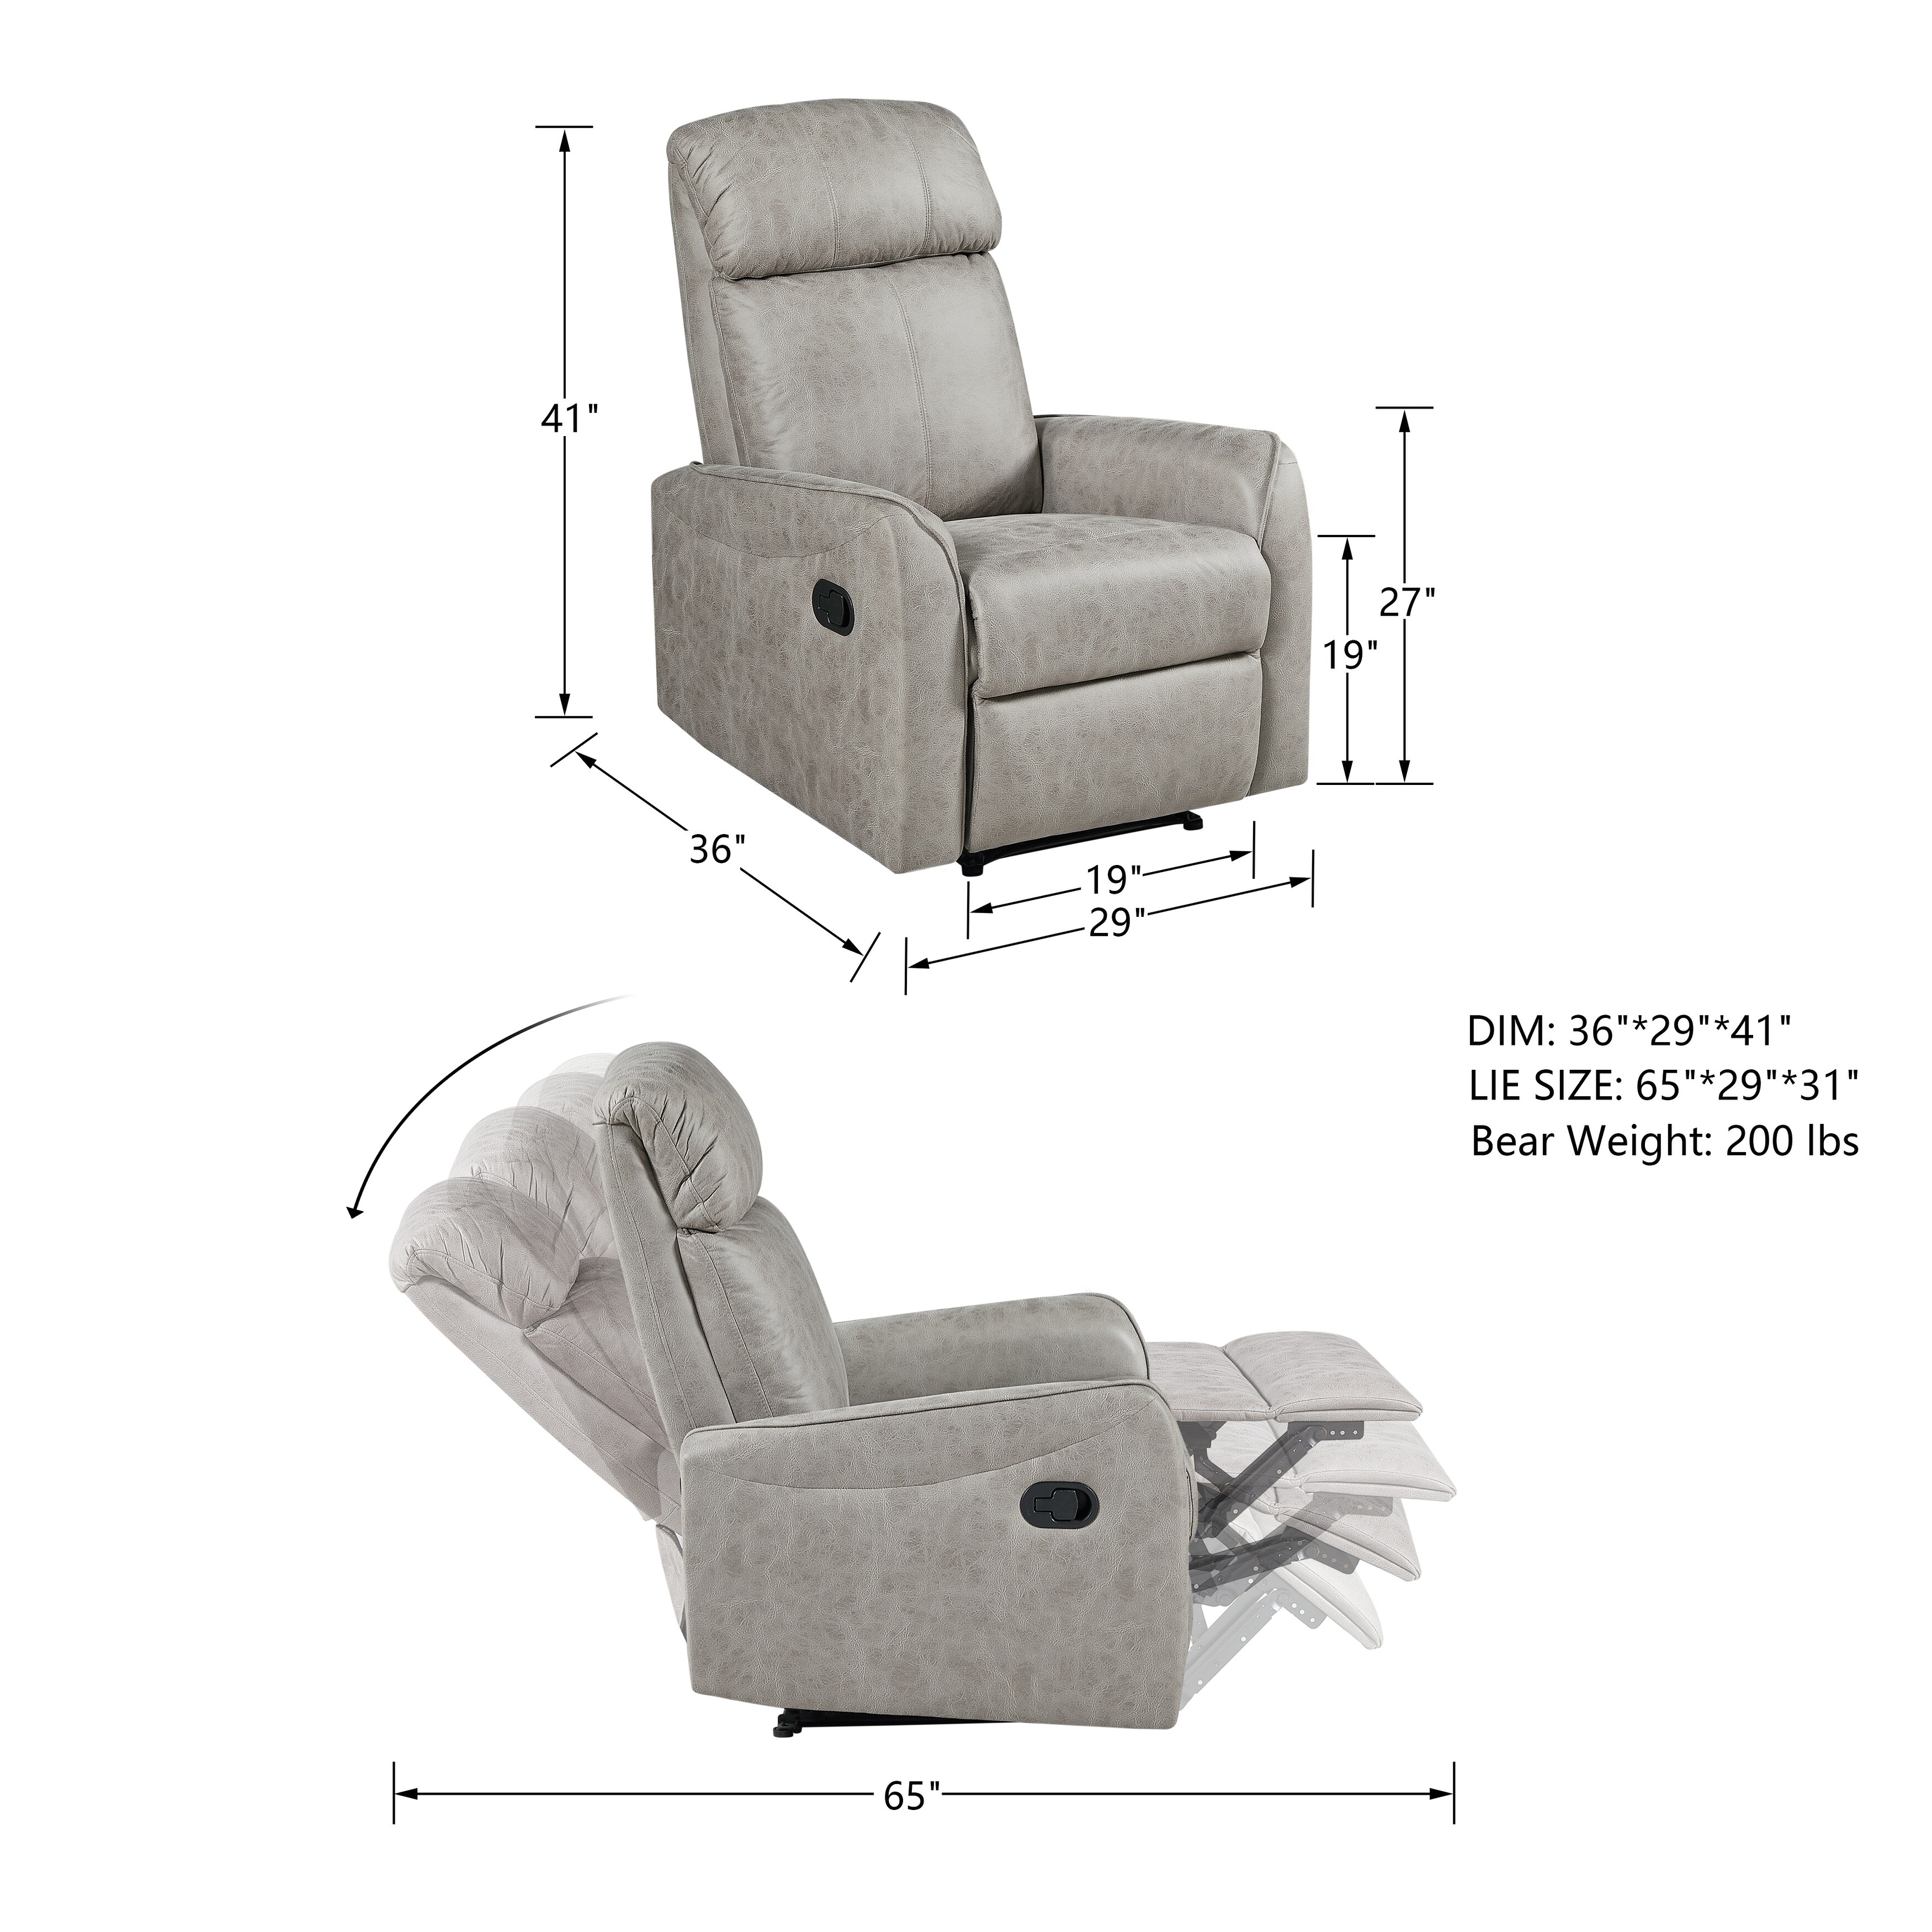 Technology Fabric Sofa Recliner Adjustable Armchair Theater Seating with Adjustable Footrest for Livingroom